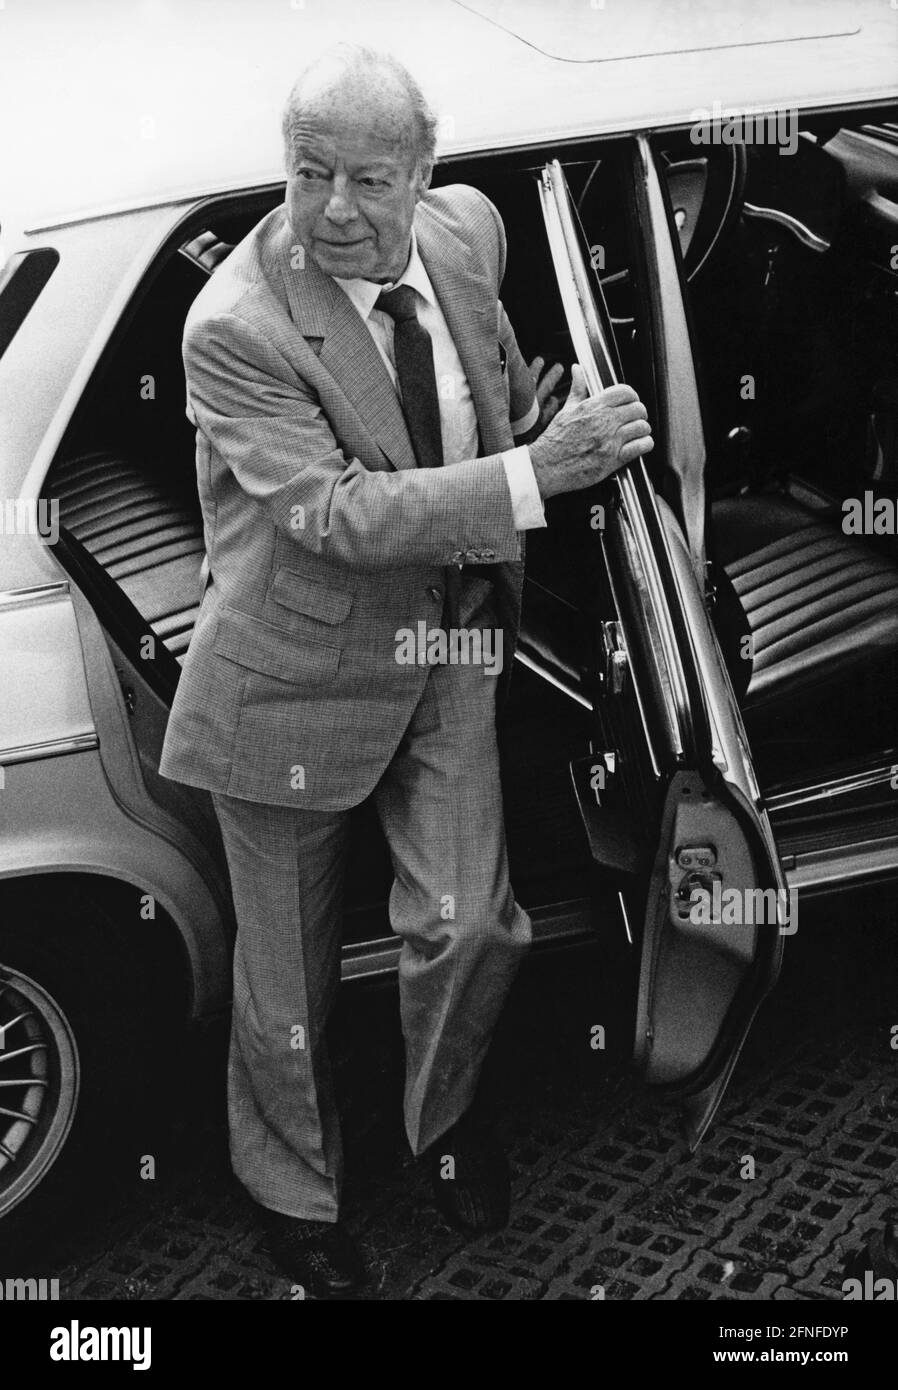 Actor Heinz Rühmann gets out of a car. [automated translation] Stock Photo